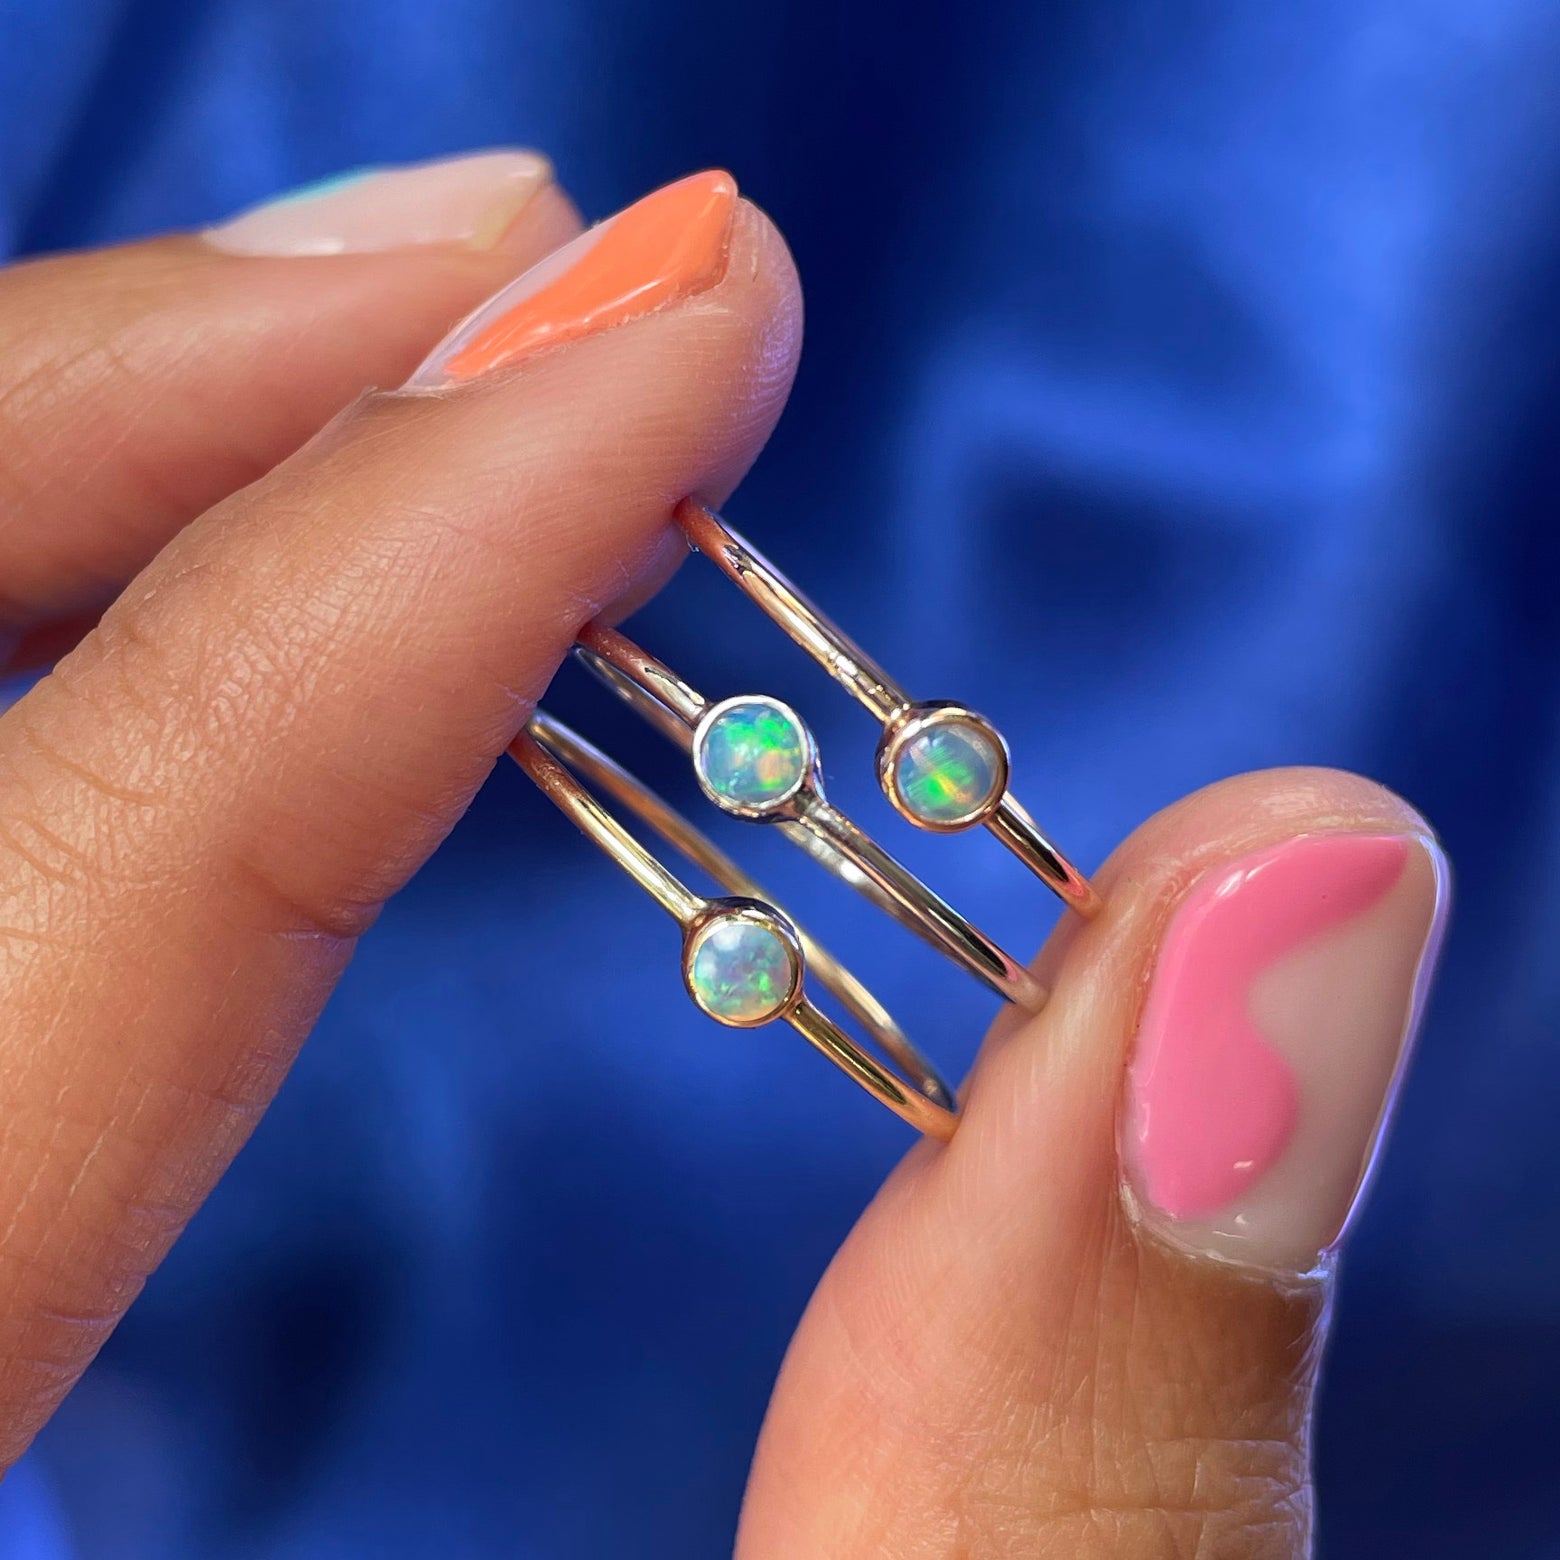 A model holding a stack of three Opal Rings between their fingers